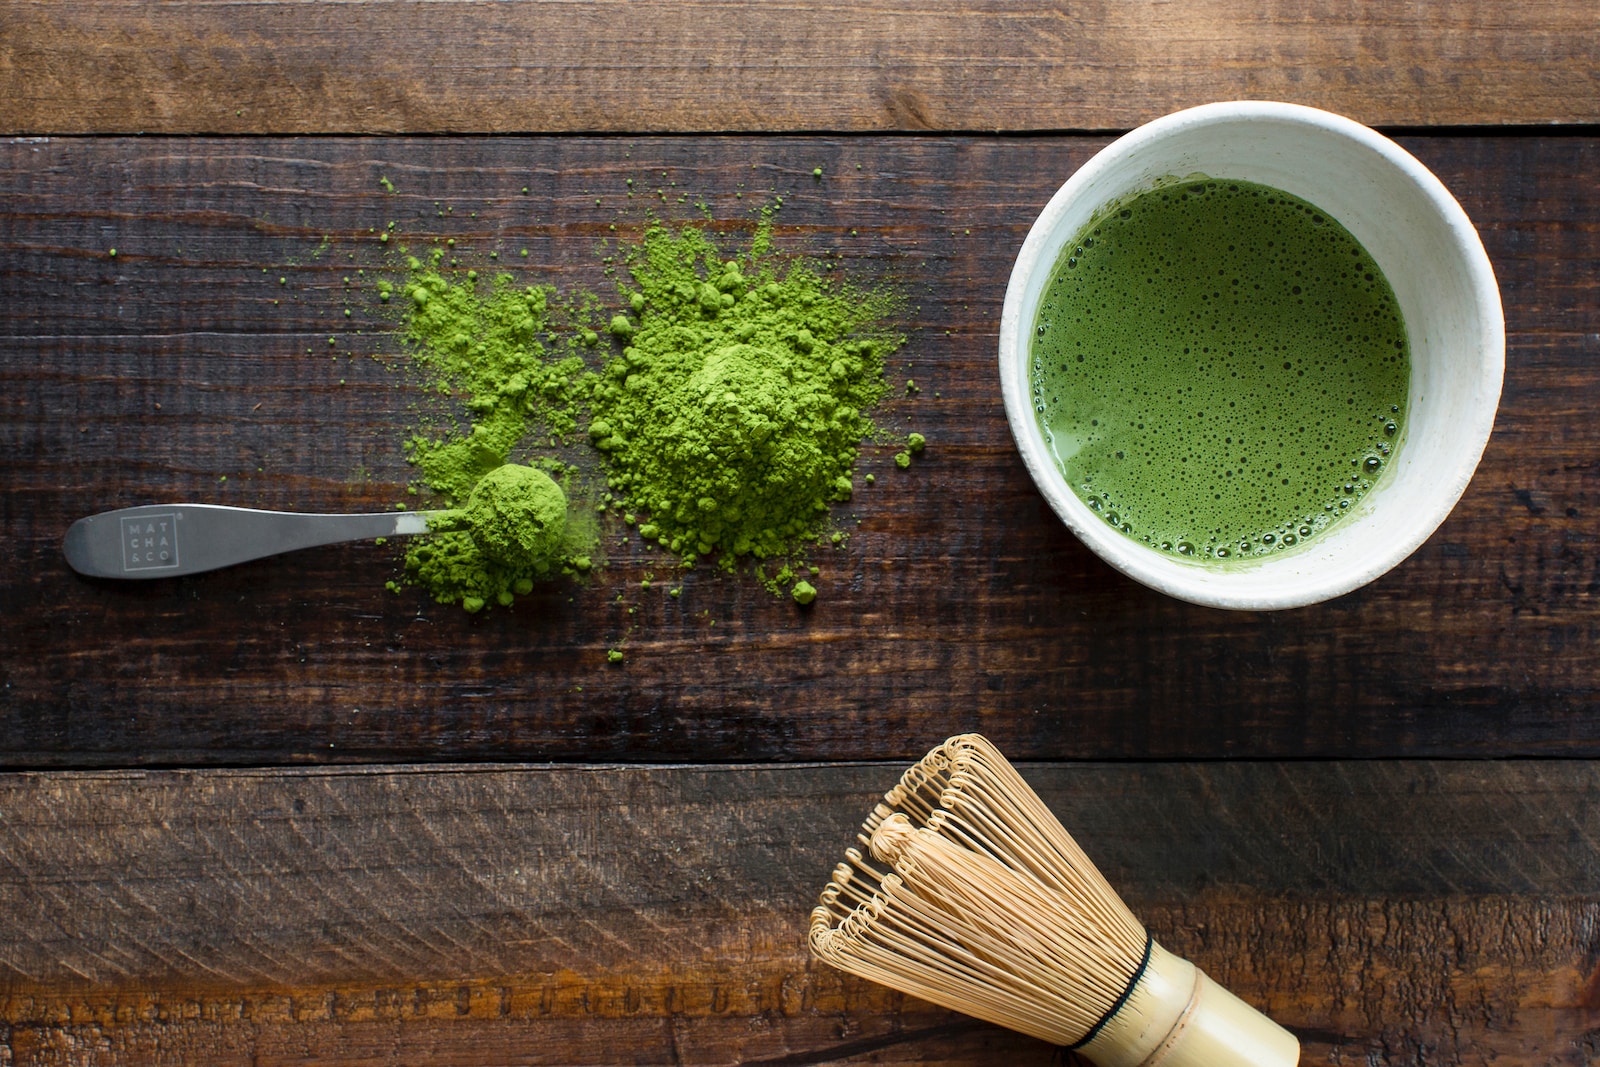 10 Surprising Benefits Of Matcha Green Tea You Need To Know - green plant in white ceramic mug beside brown wooden brush